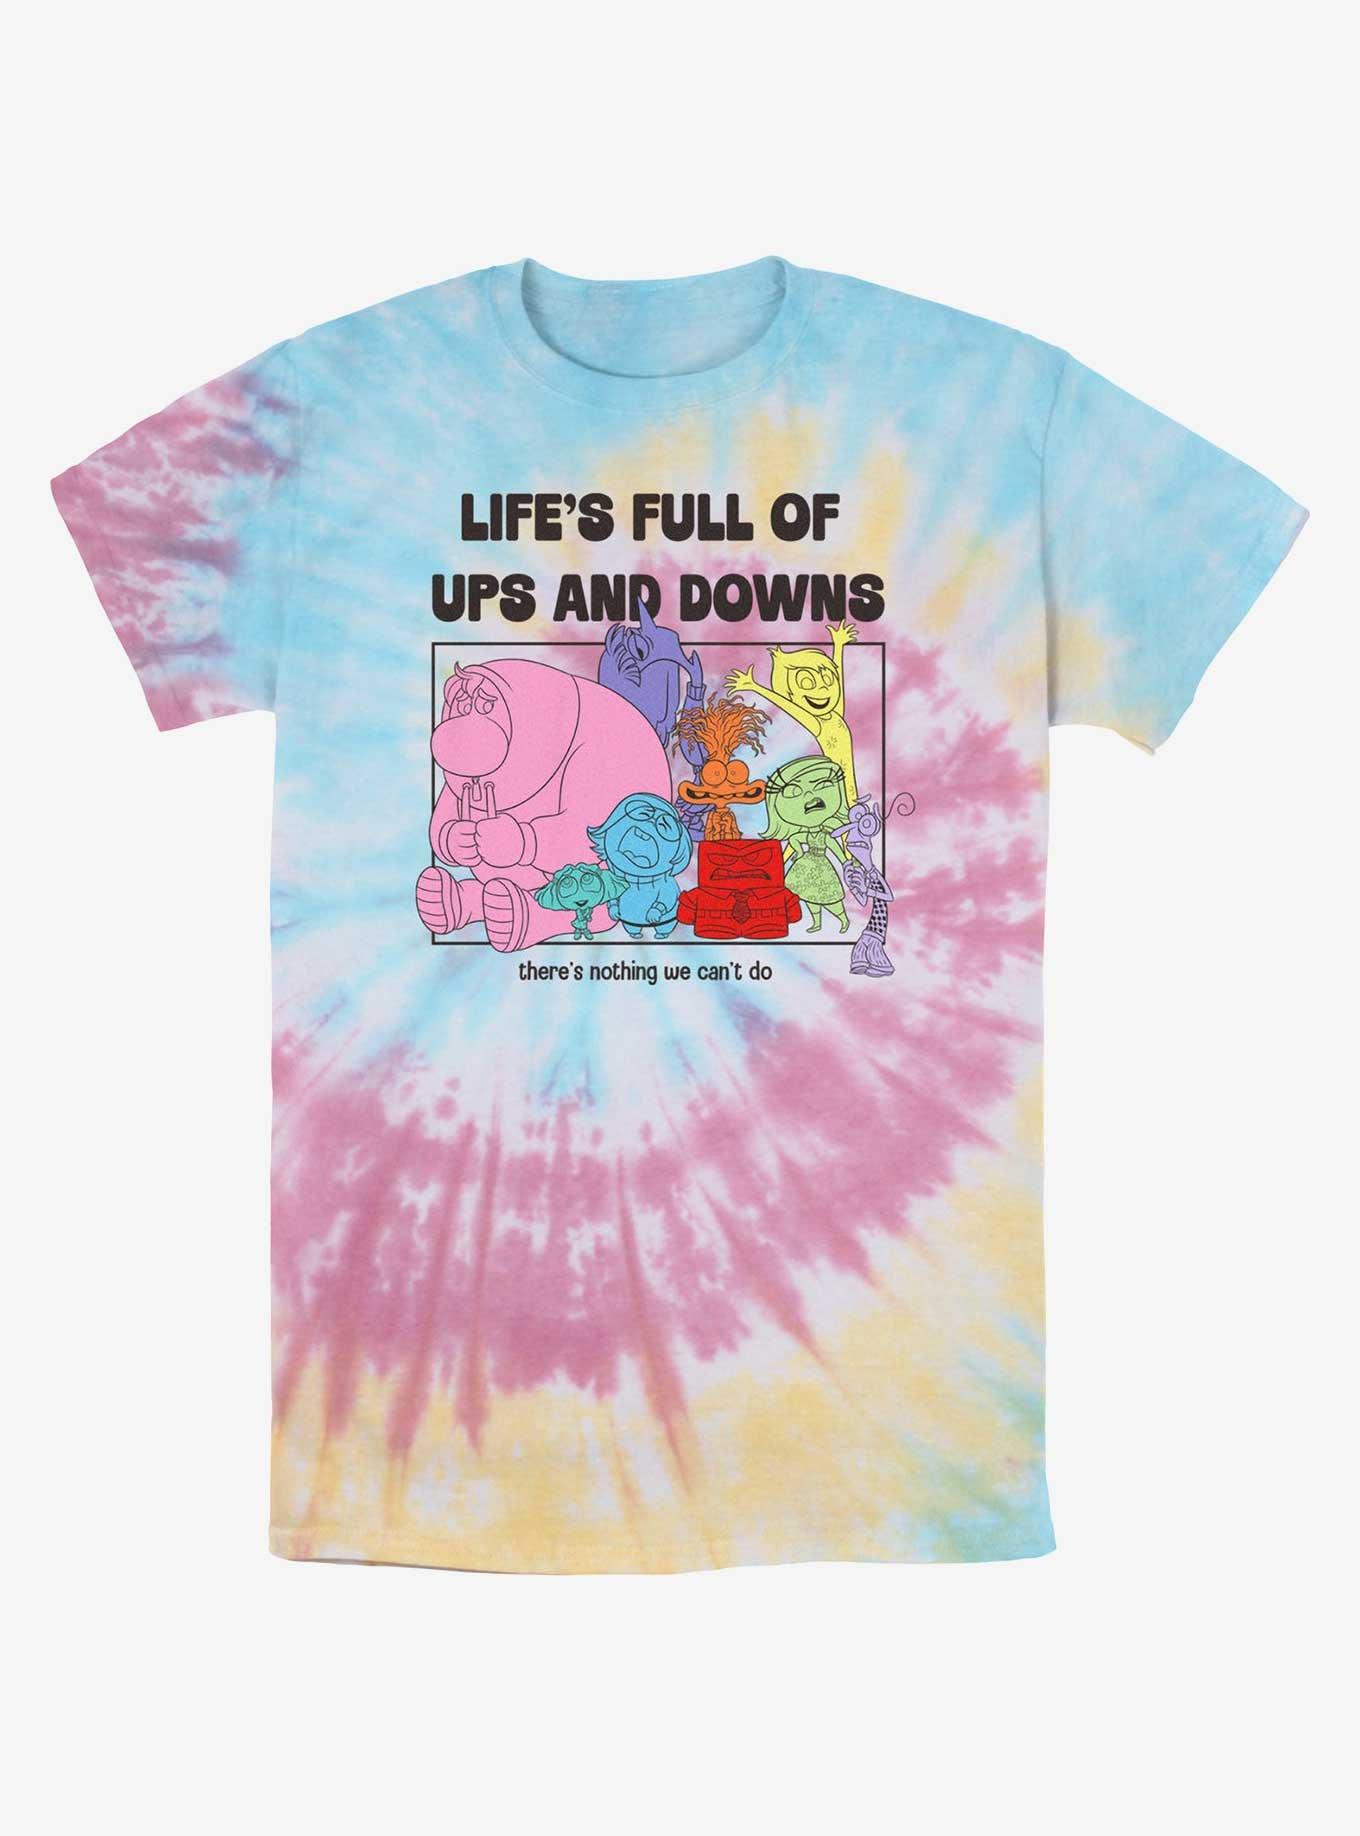 Disney Pixar Inside Out 2 Life's Full Of Ups And Downs Tie-Dye T-Shirt, BLUPNKLY, hi-res